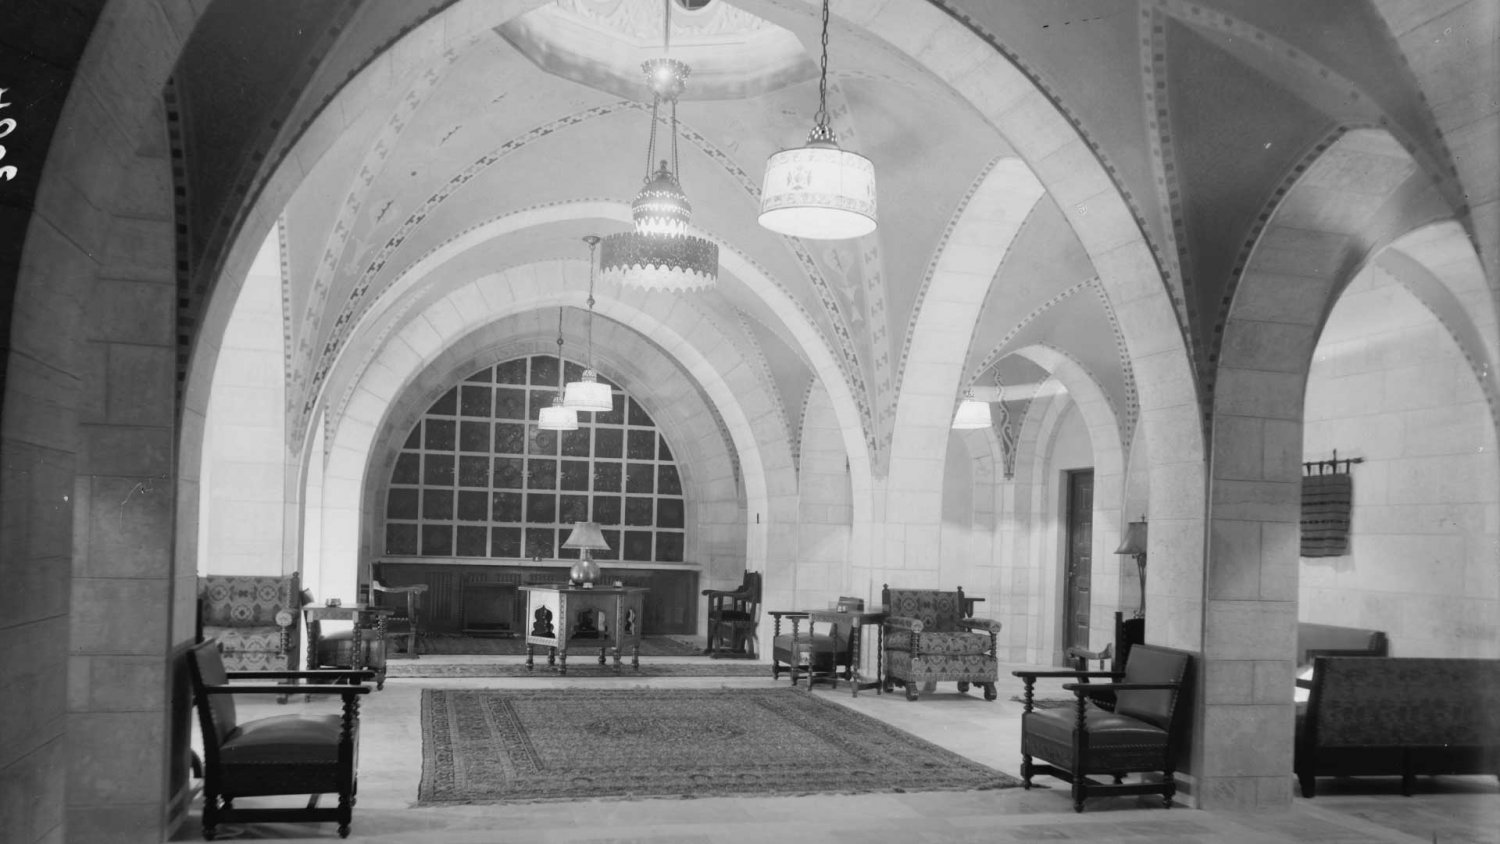 Jerusalem YMCA lounge, 1933, the year of the building’s inauguration